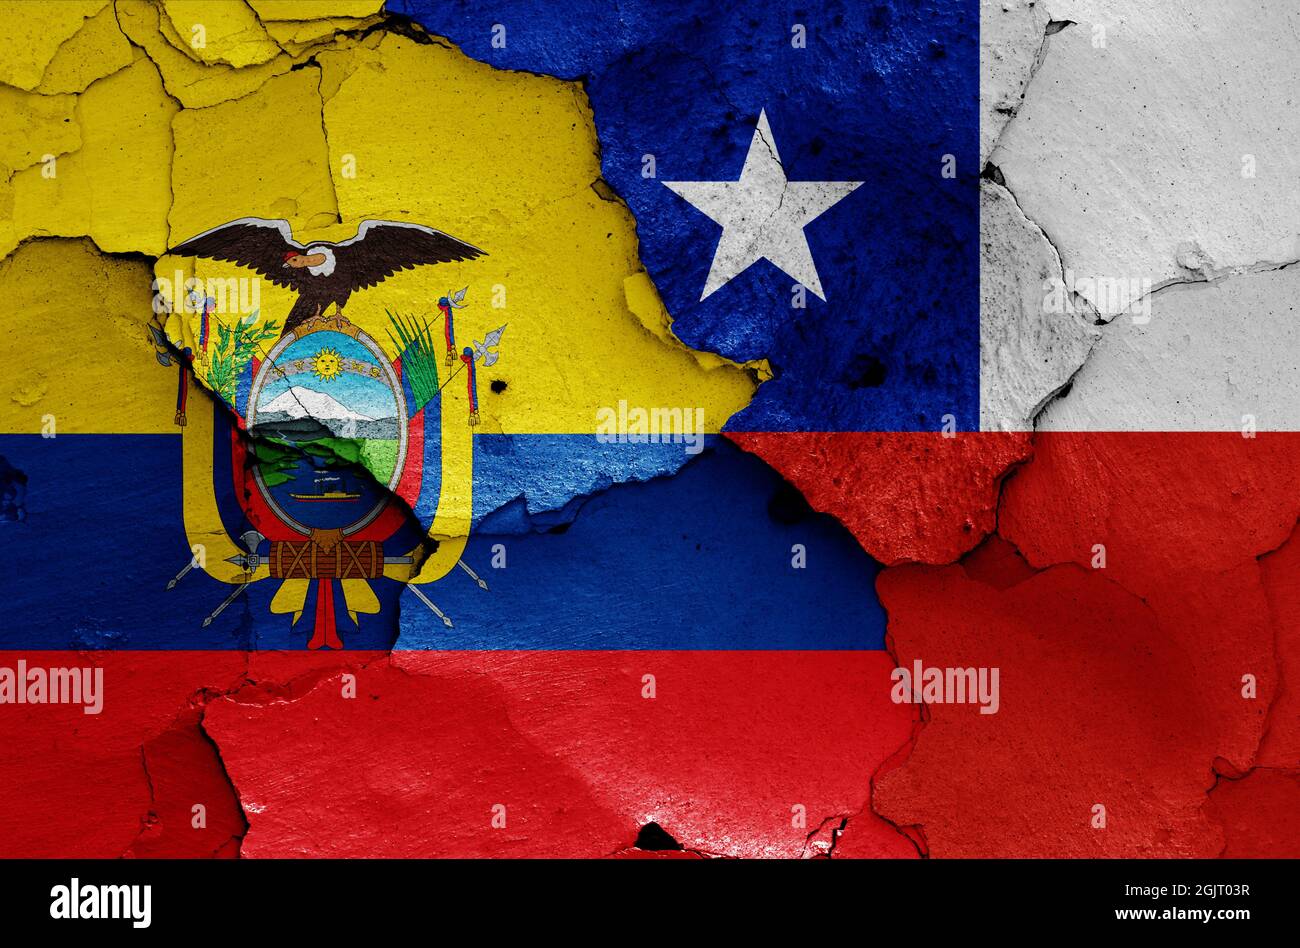 flags of Ecuador and Chile painted on cracked wall Stock Photo